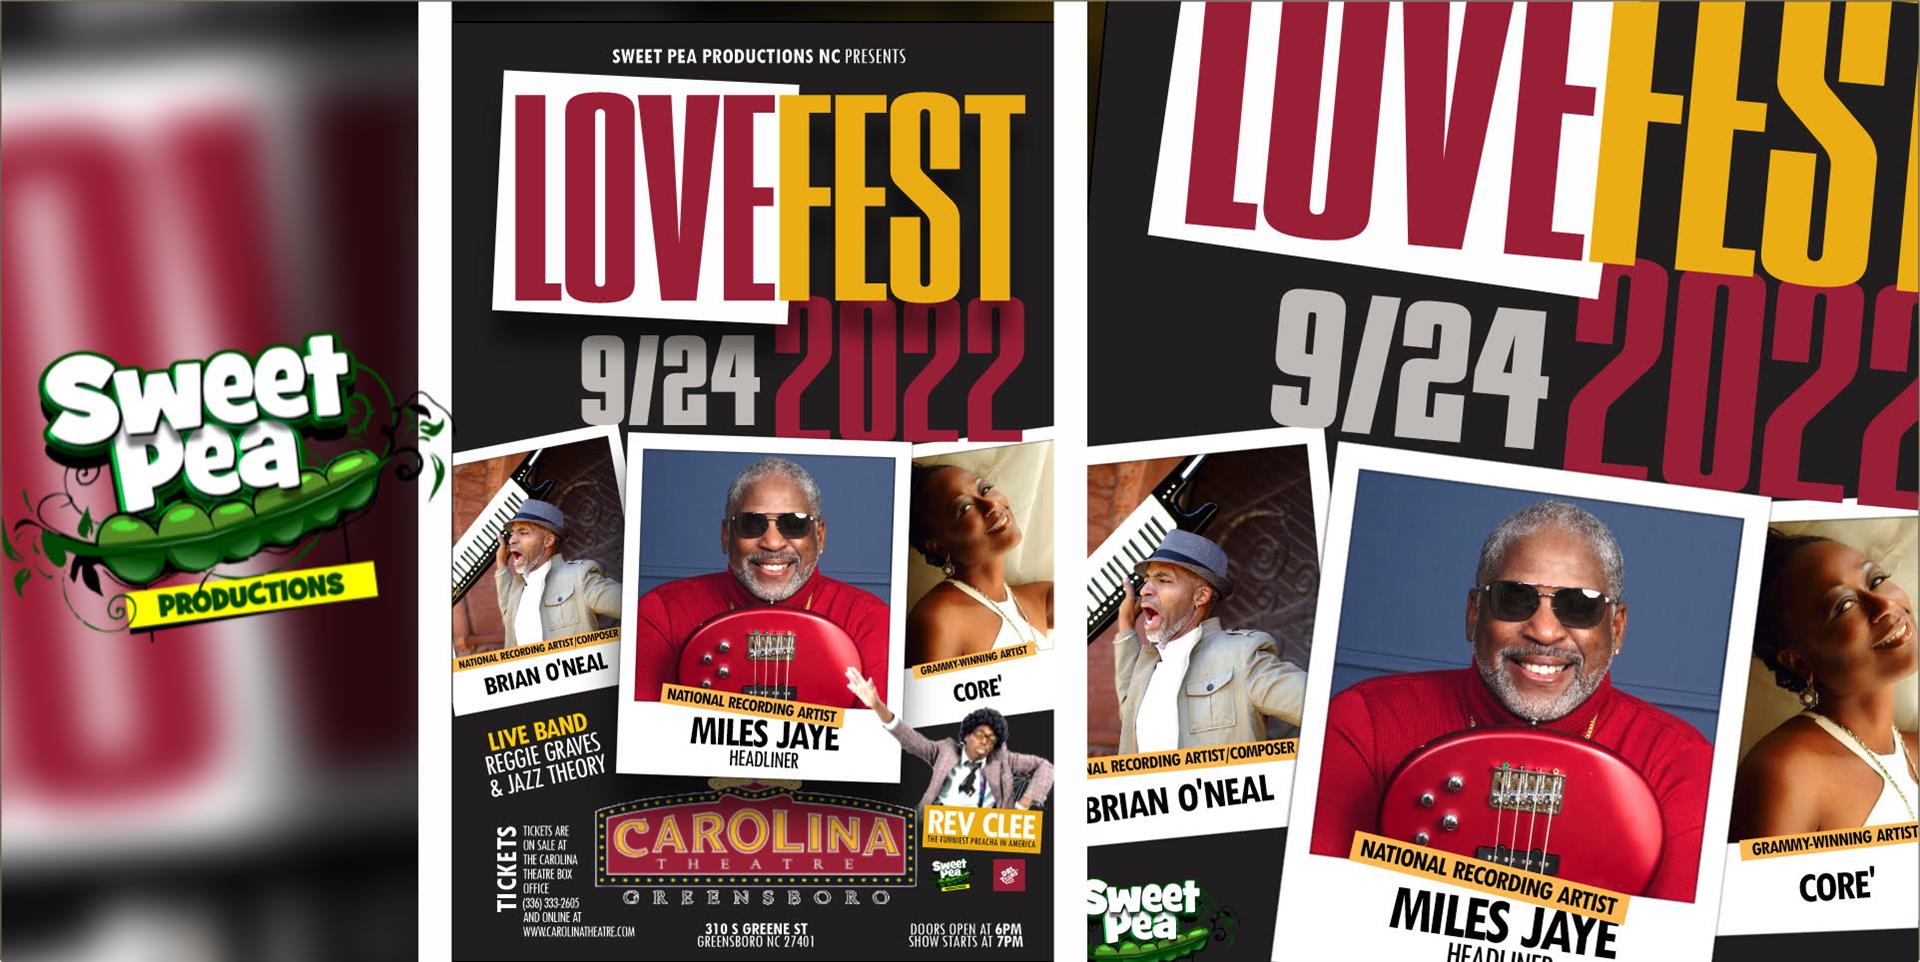 LoveFest 2022 - Sweet Pea Productions NC